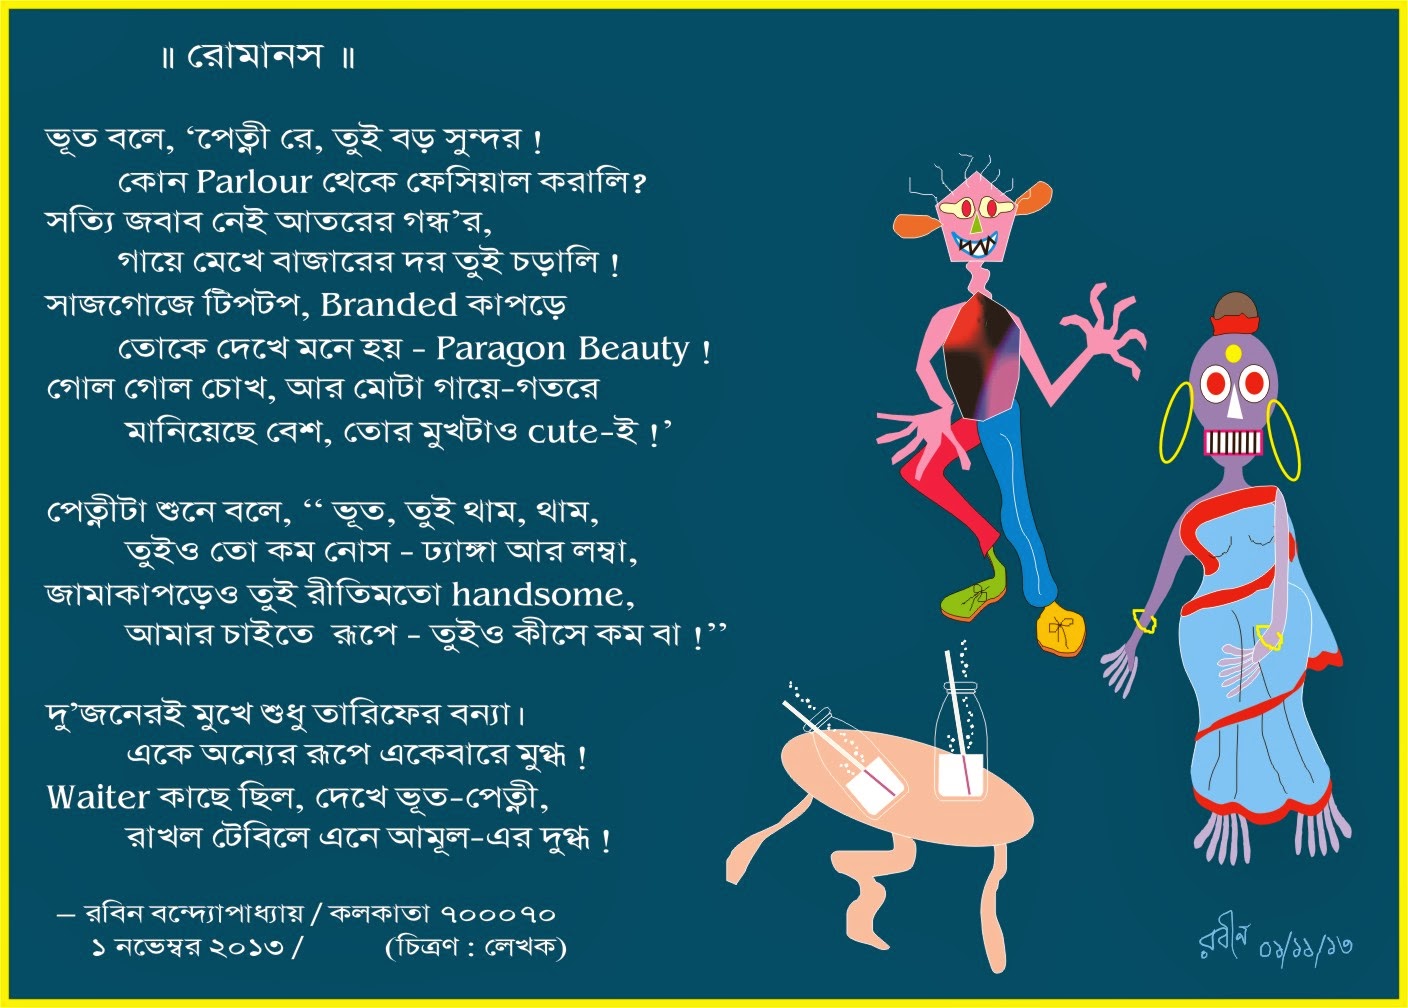 robinscreations: Bengali Nonsense Rhymes/Poems on Ghosts !